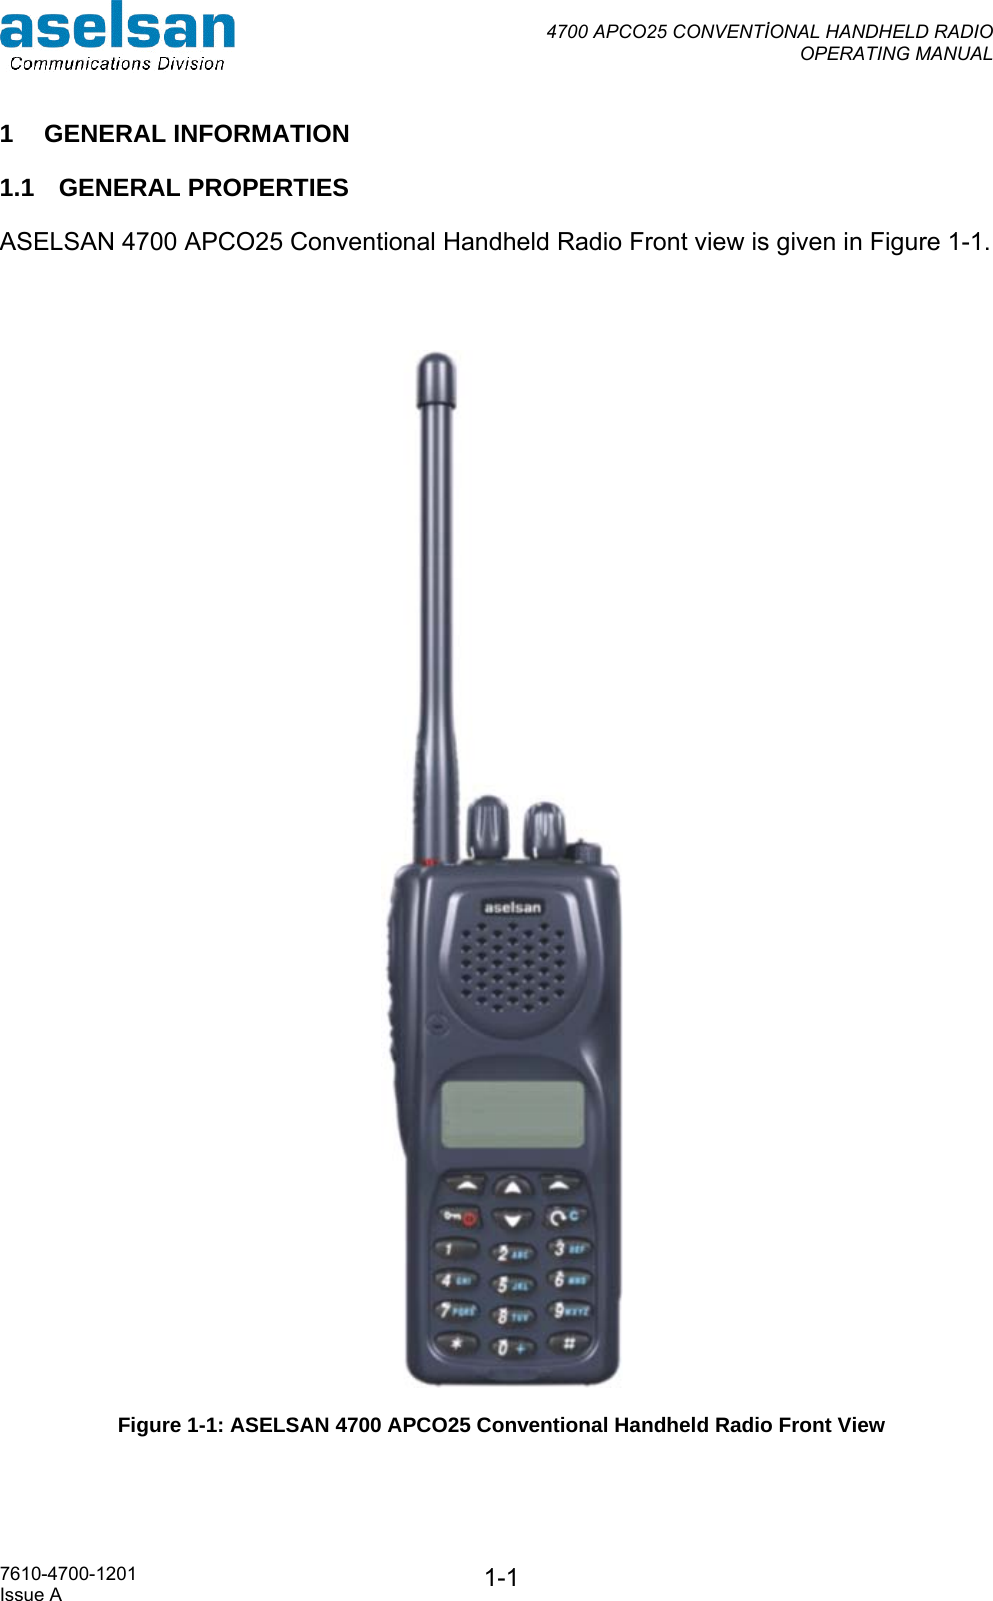  4700 APCO25 CONVENTİONAL HANDHELD RADIO  OPERATING MANUAL   7610-4700-1201 Issue A  1-11 GENERAL INFORMATION 1.1 GENERAL PROPERTIES ASELSAN 4700 APCO25 Conventional Handheld Radio Front view is given in Figure 1-1.    Figure 1-1: ASELSAN 4700 APCO25 Conventional Handheld Radio Front View 